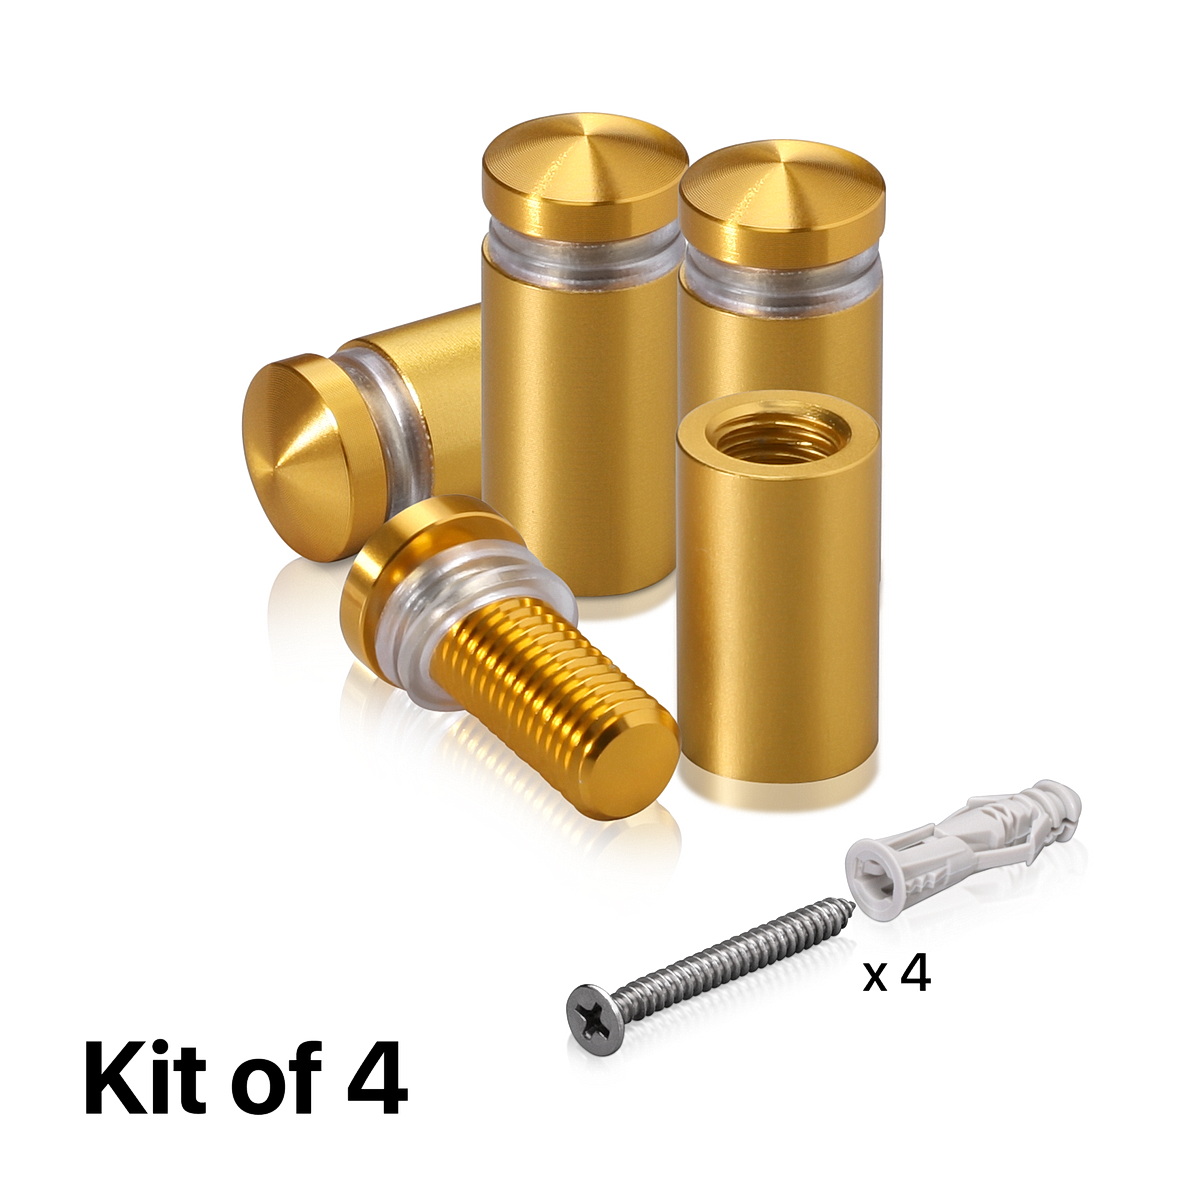 (Set of 4) 1/2'' Diameter X 3/4'' Barrel Length, Aluminum Rounded Head Standoffs, Gold Anodized Finish Standoff with (4) 2208Z Screw and (4) LANC1 Anchor for concrete or drywall (For Inside / Outside use) [Required Material Hole Size: 3/8'']